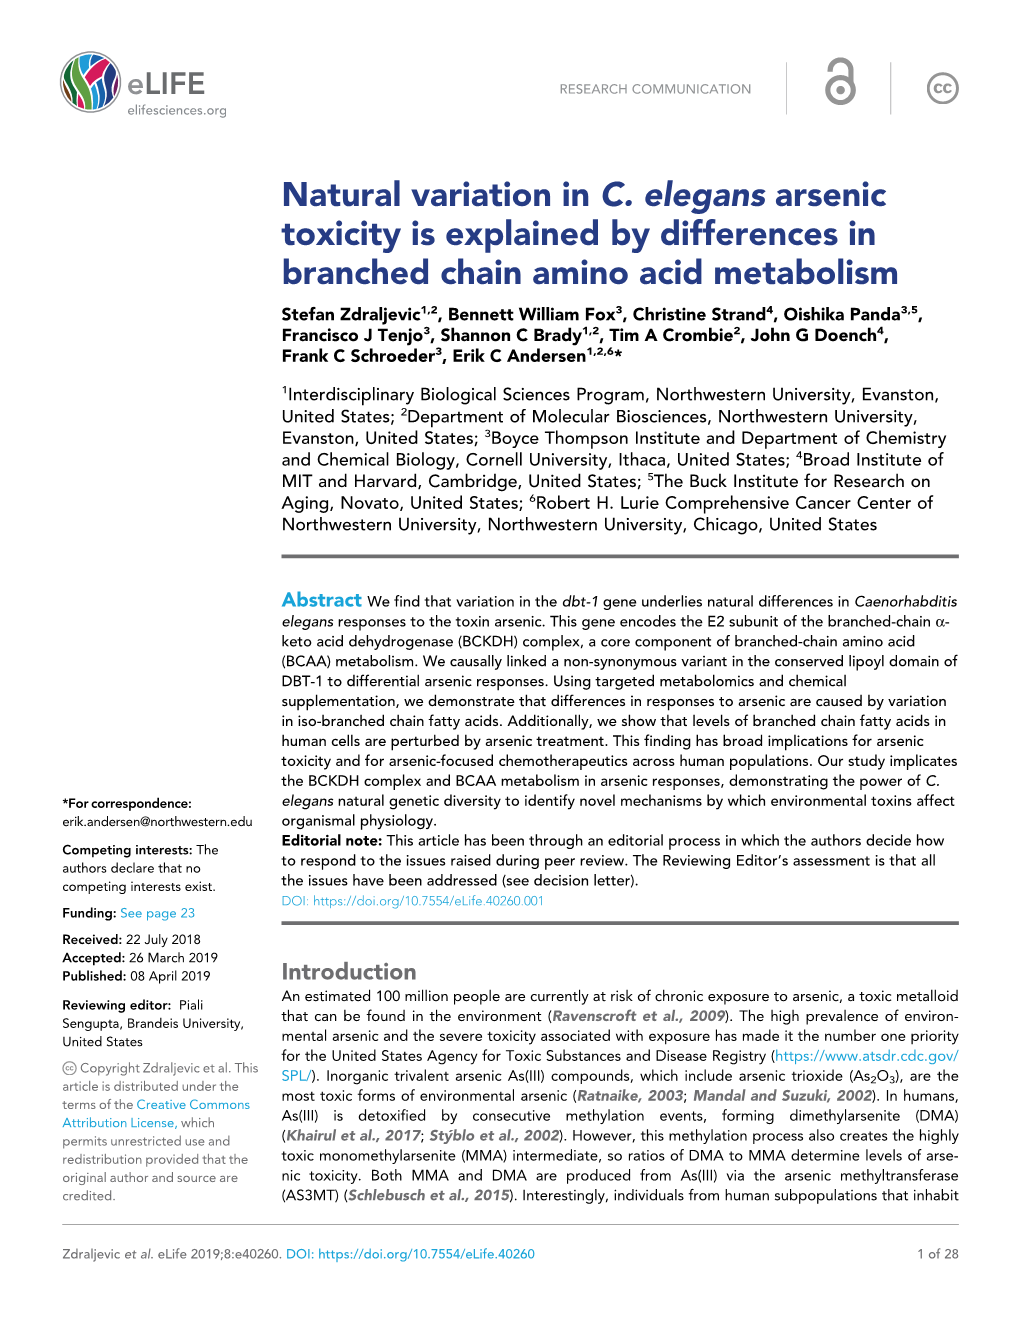 Natural Variation in C. Elegans Arsenic Toxicity Is Explained by Differences